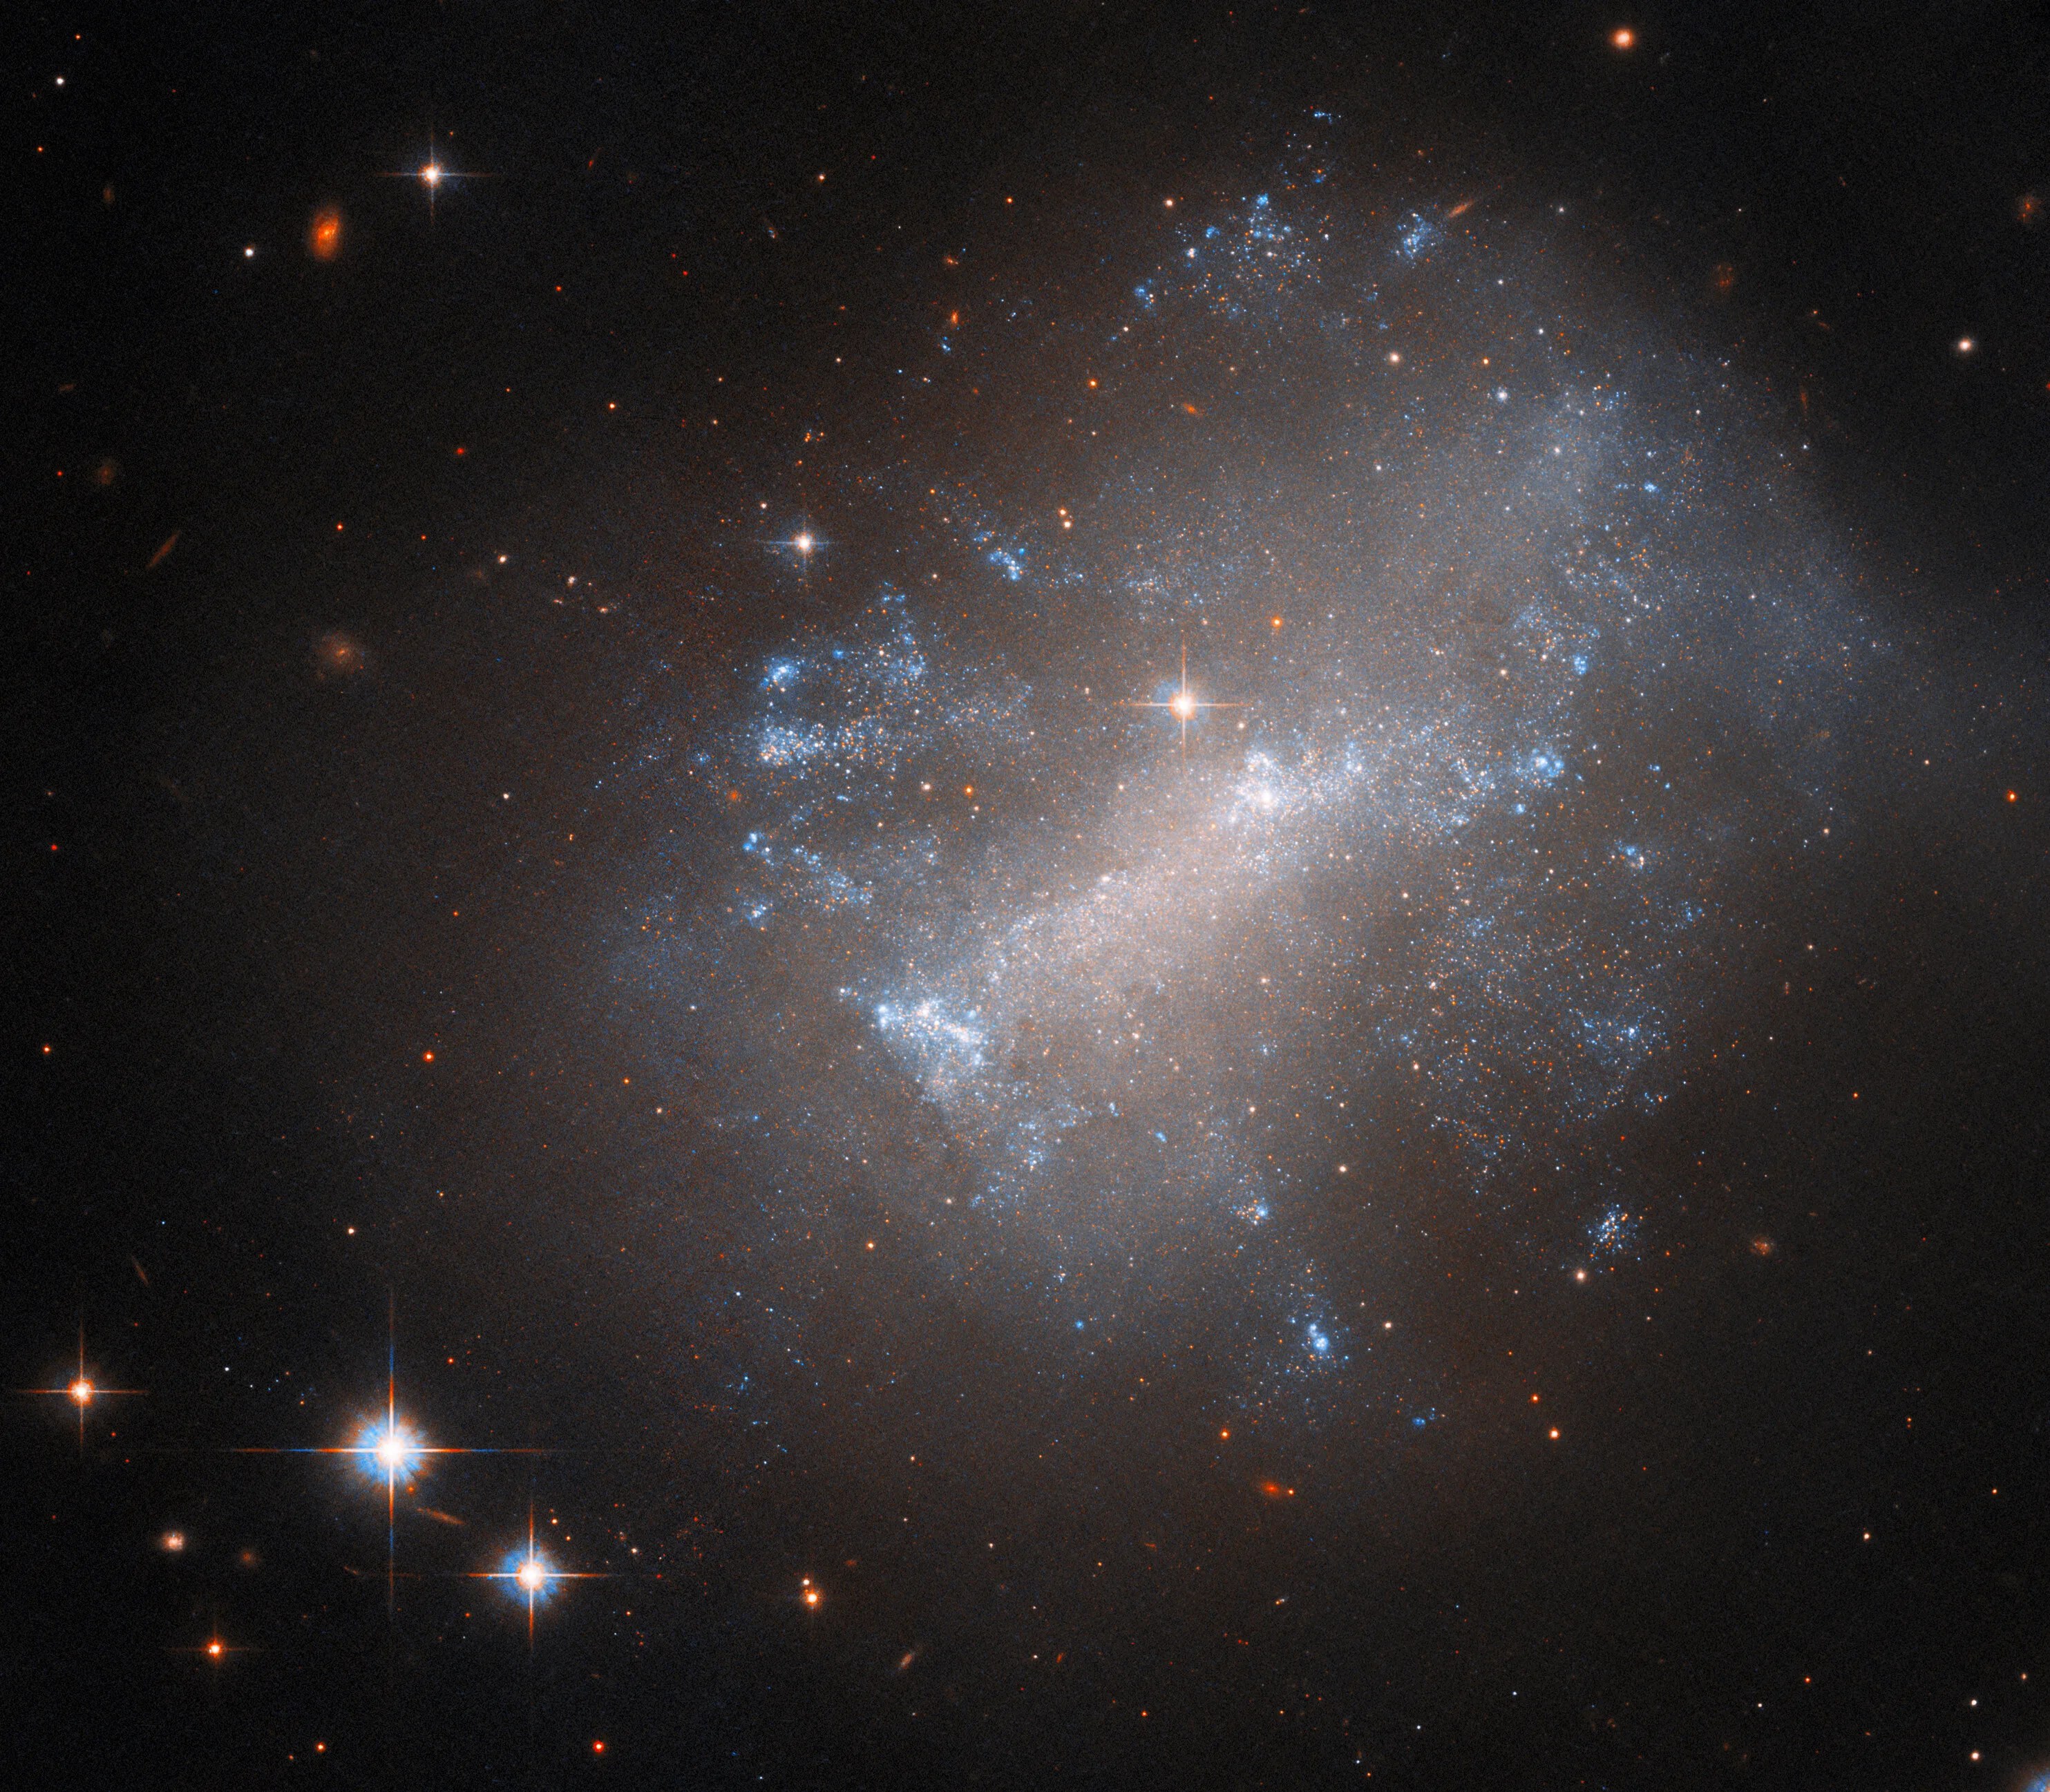 A galaxy fills up most of the frame from the right. It is fuzzy and diffuse but made up of numerous tiny stars. In the core, the stars merge into a glowing bar shape. The gas and stars in the galaxy vary between warm and cool colors. They are spread over a large area, the colors mixing like clouds. The glow of the galaxy fades into a black background, with a few stars and small, distant galaxies.